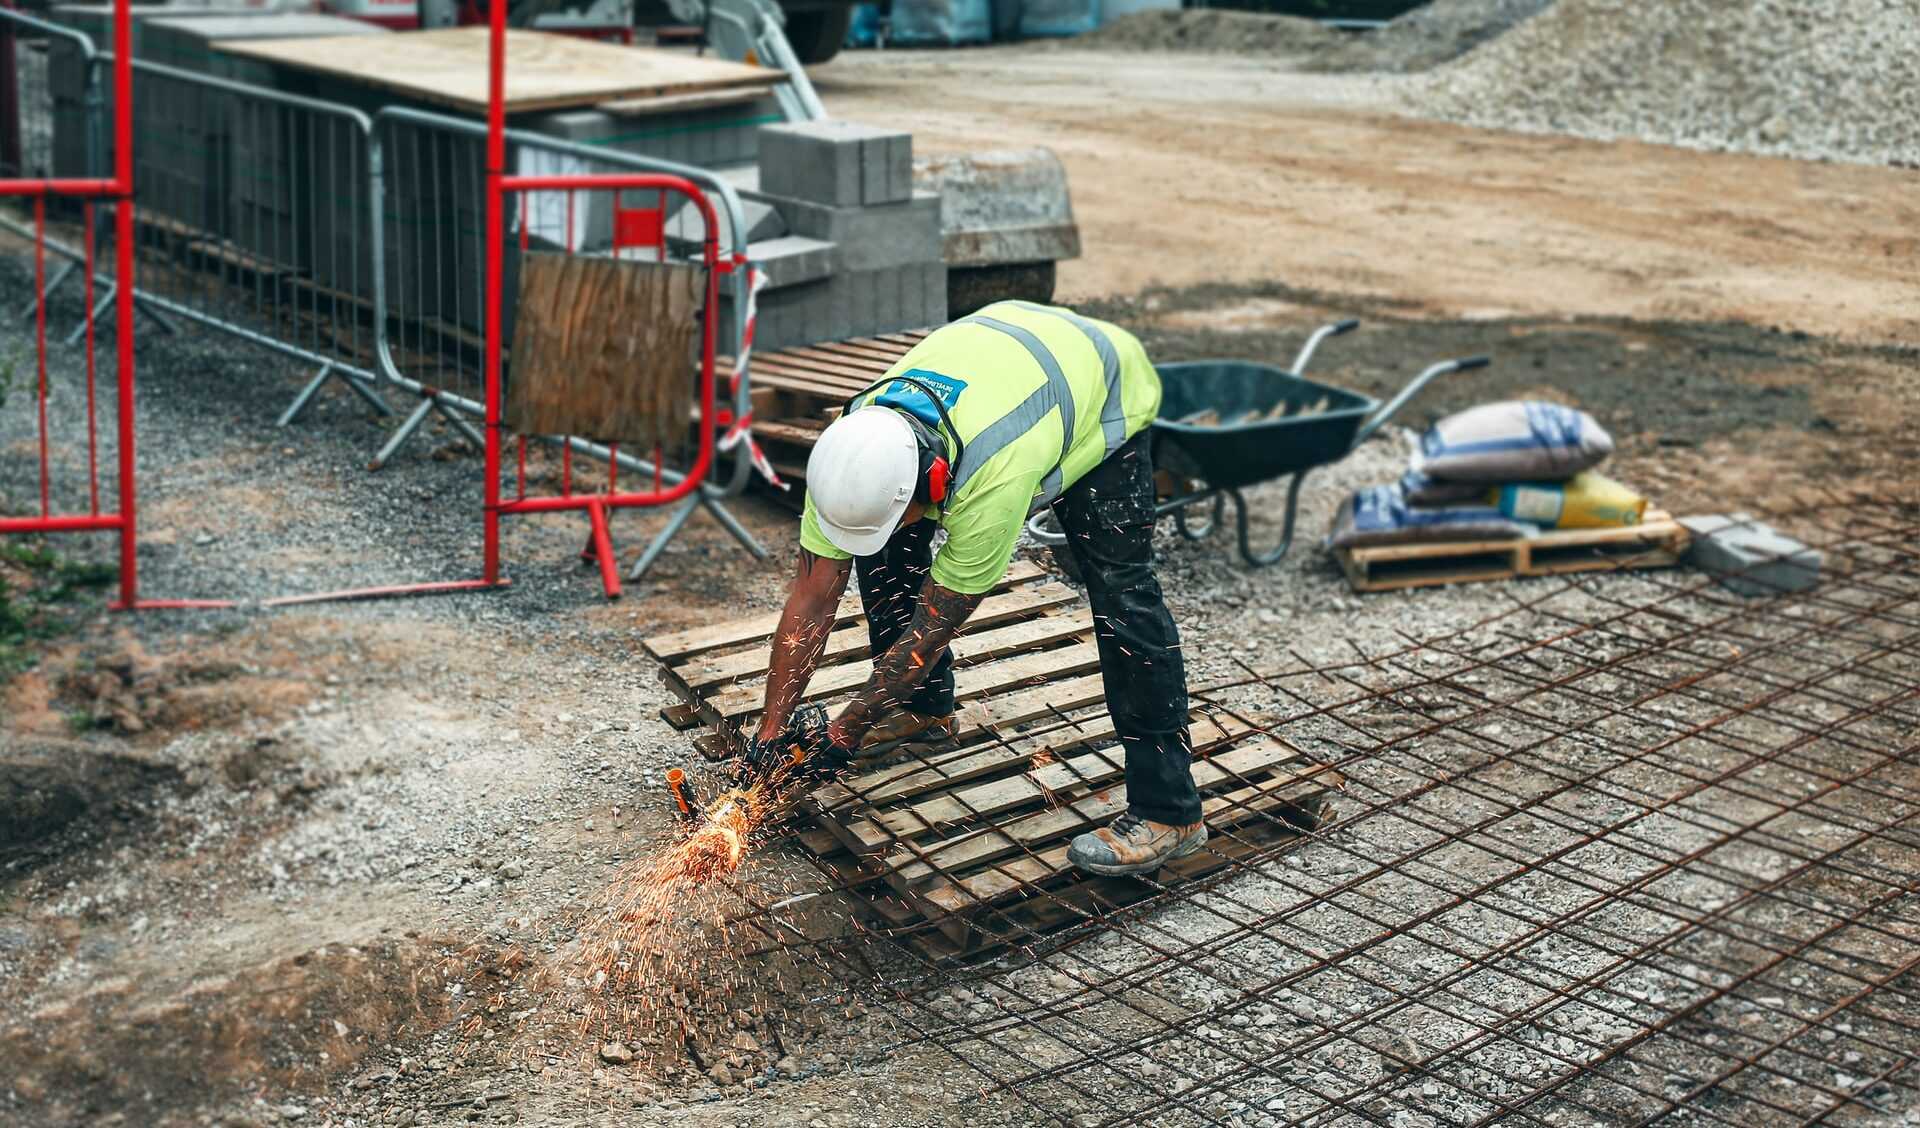 A labourer dressed in high vis clothing using a steel saw